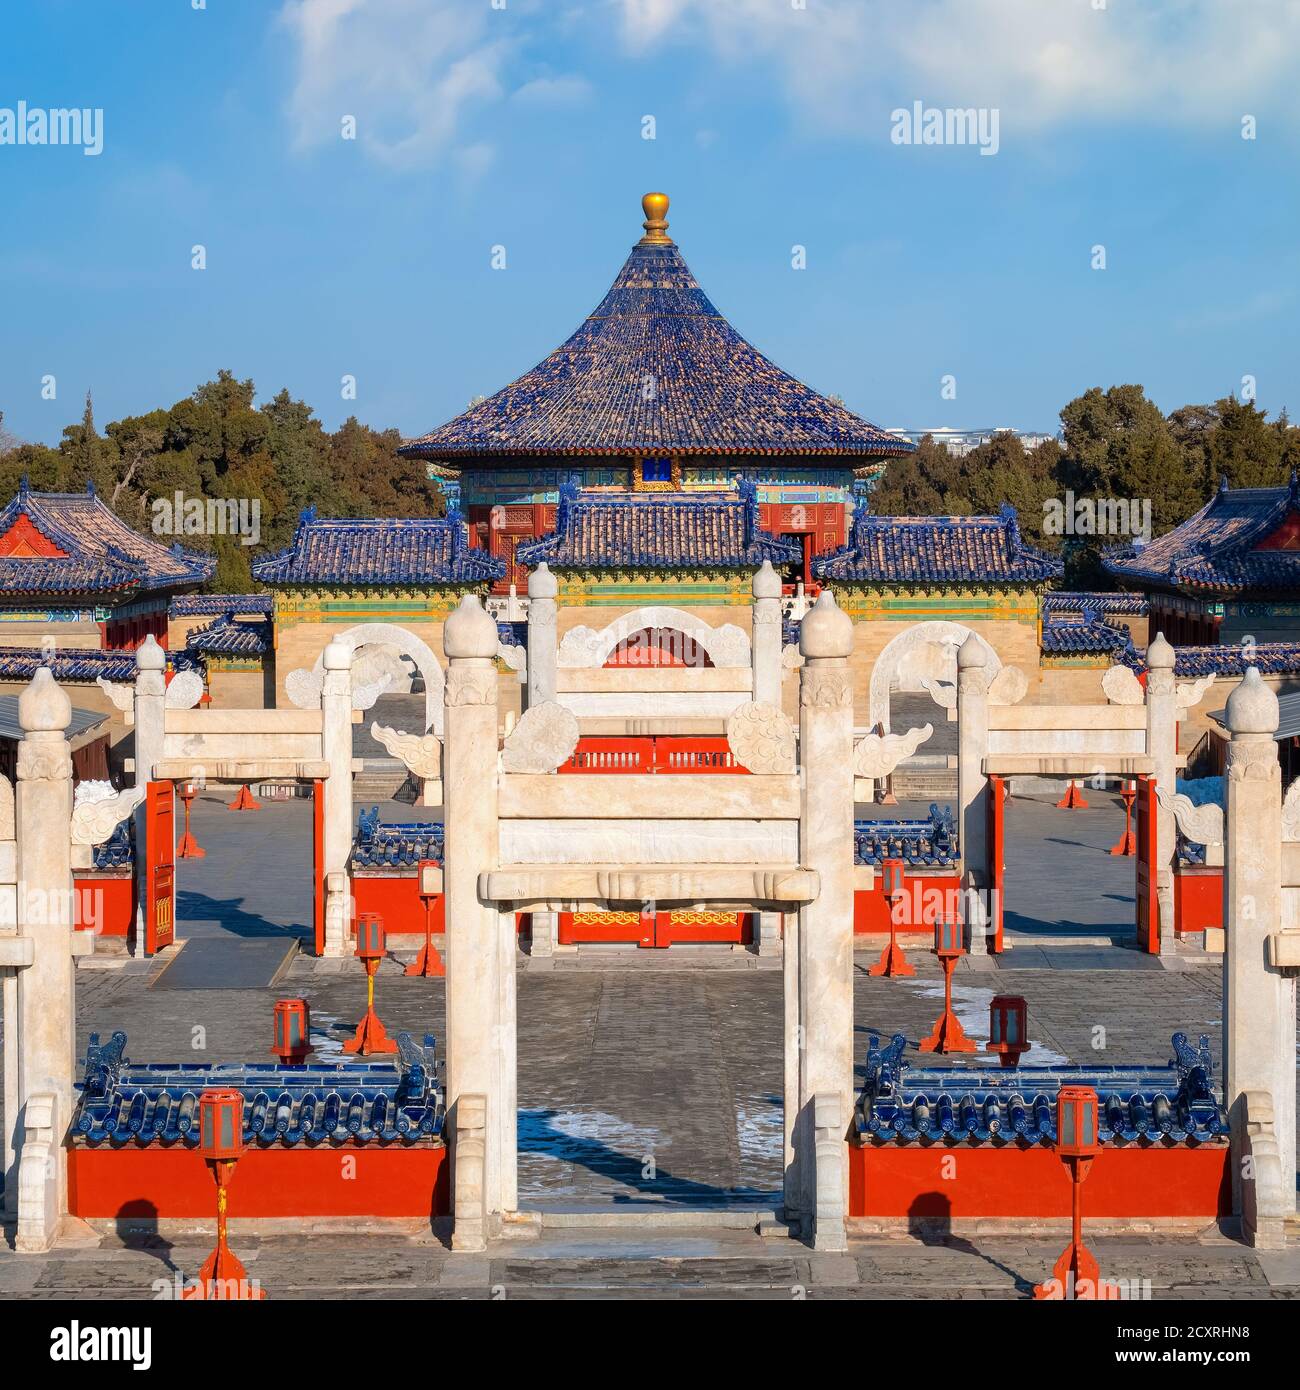 Beijing, China - Jan 10 2020: The Circular Mound Altar at the Temple of Heaven, an imperial complex of religious buildings founded by Yongle Emperor i Stock Photo